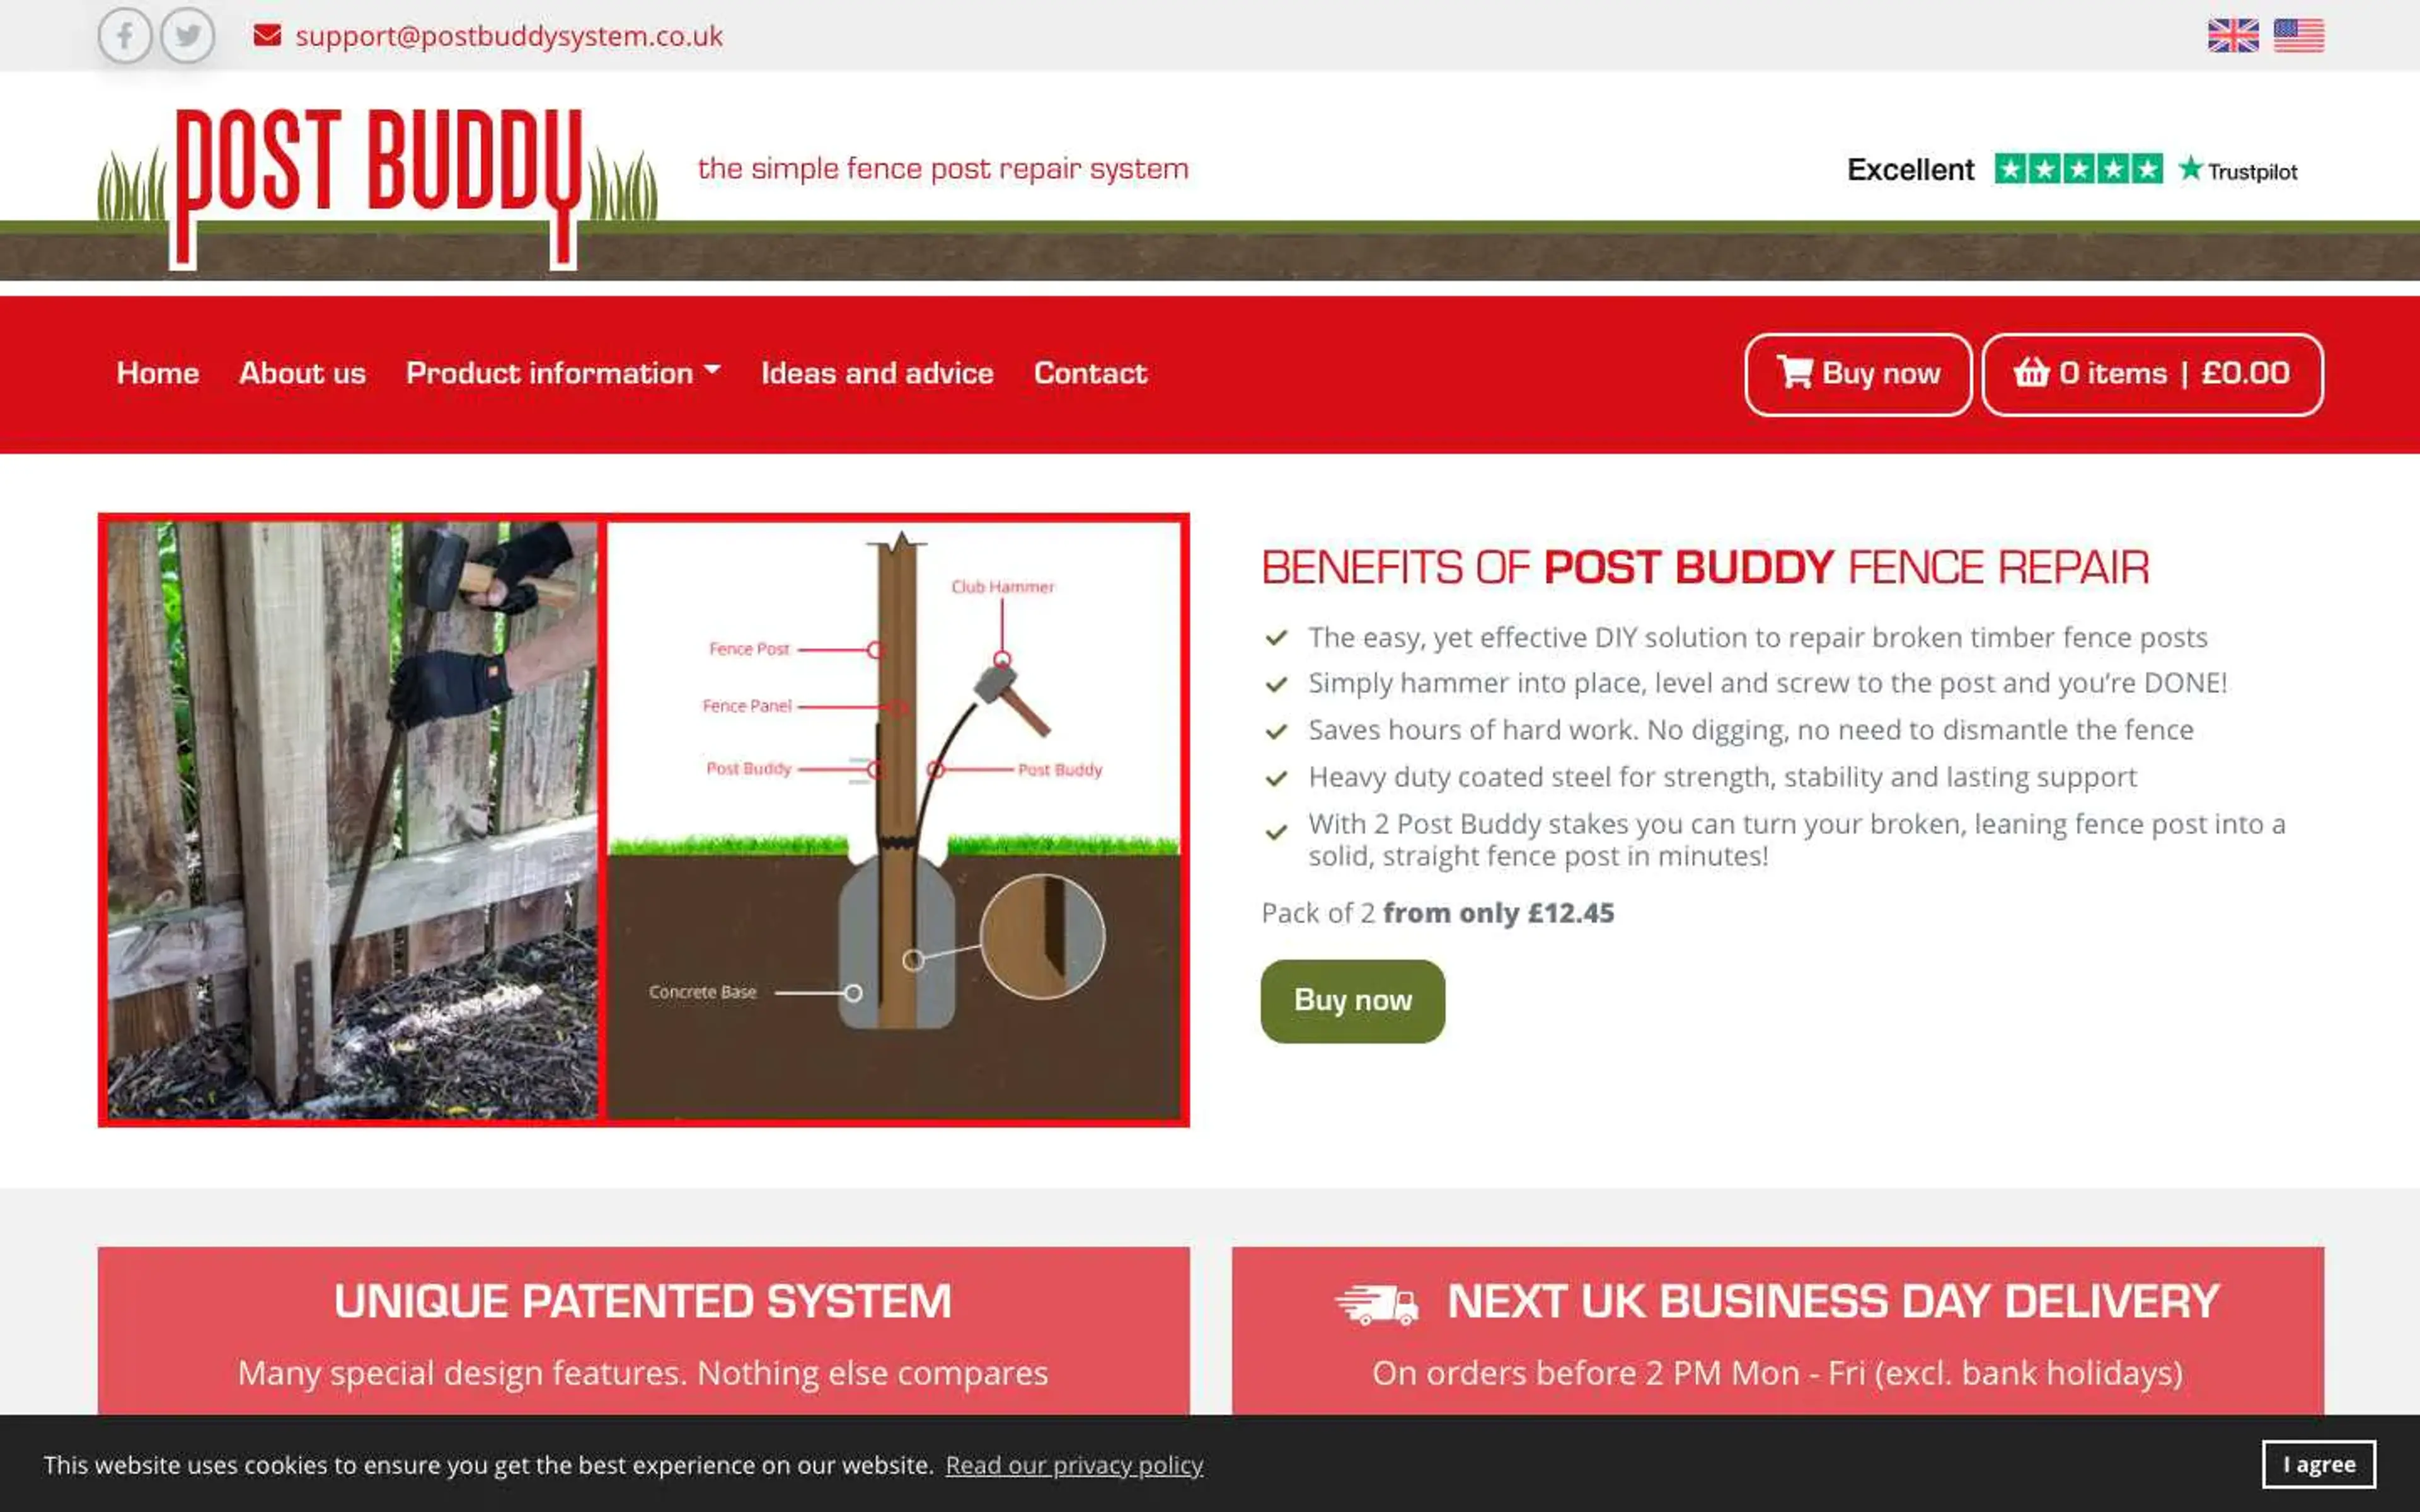 Recent project we worked on for Post Buddy System